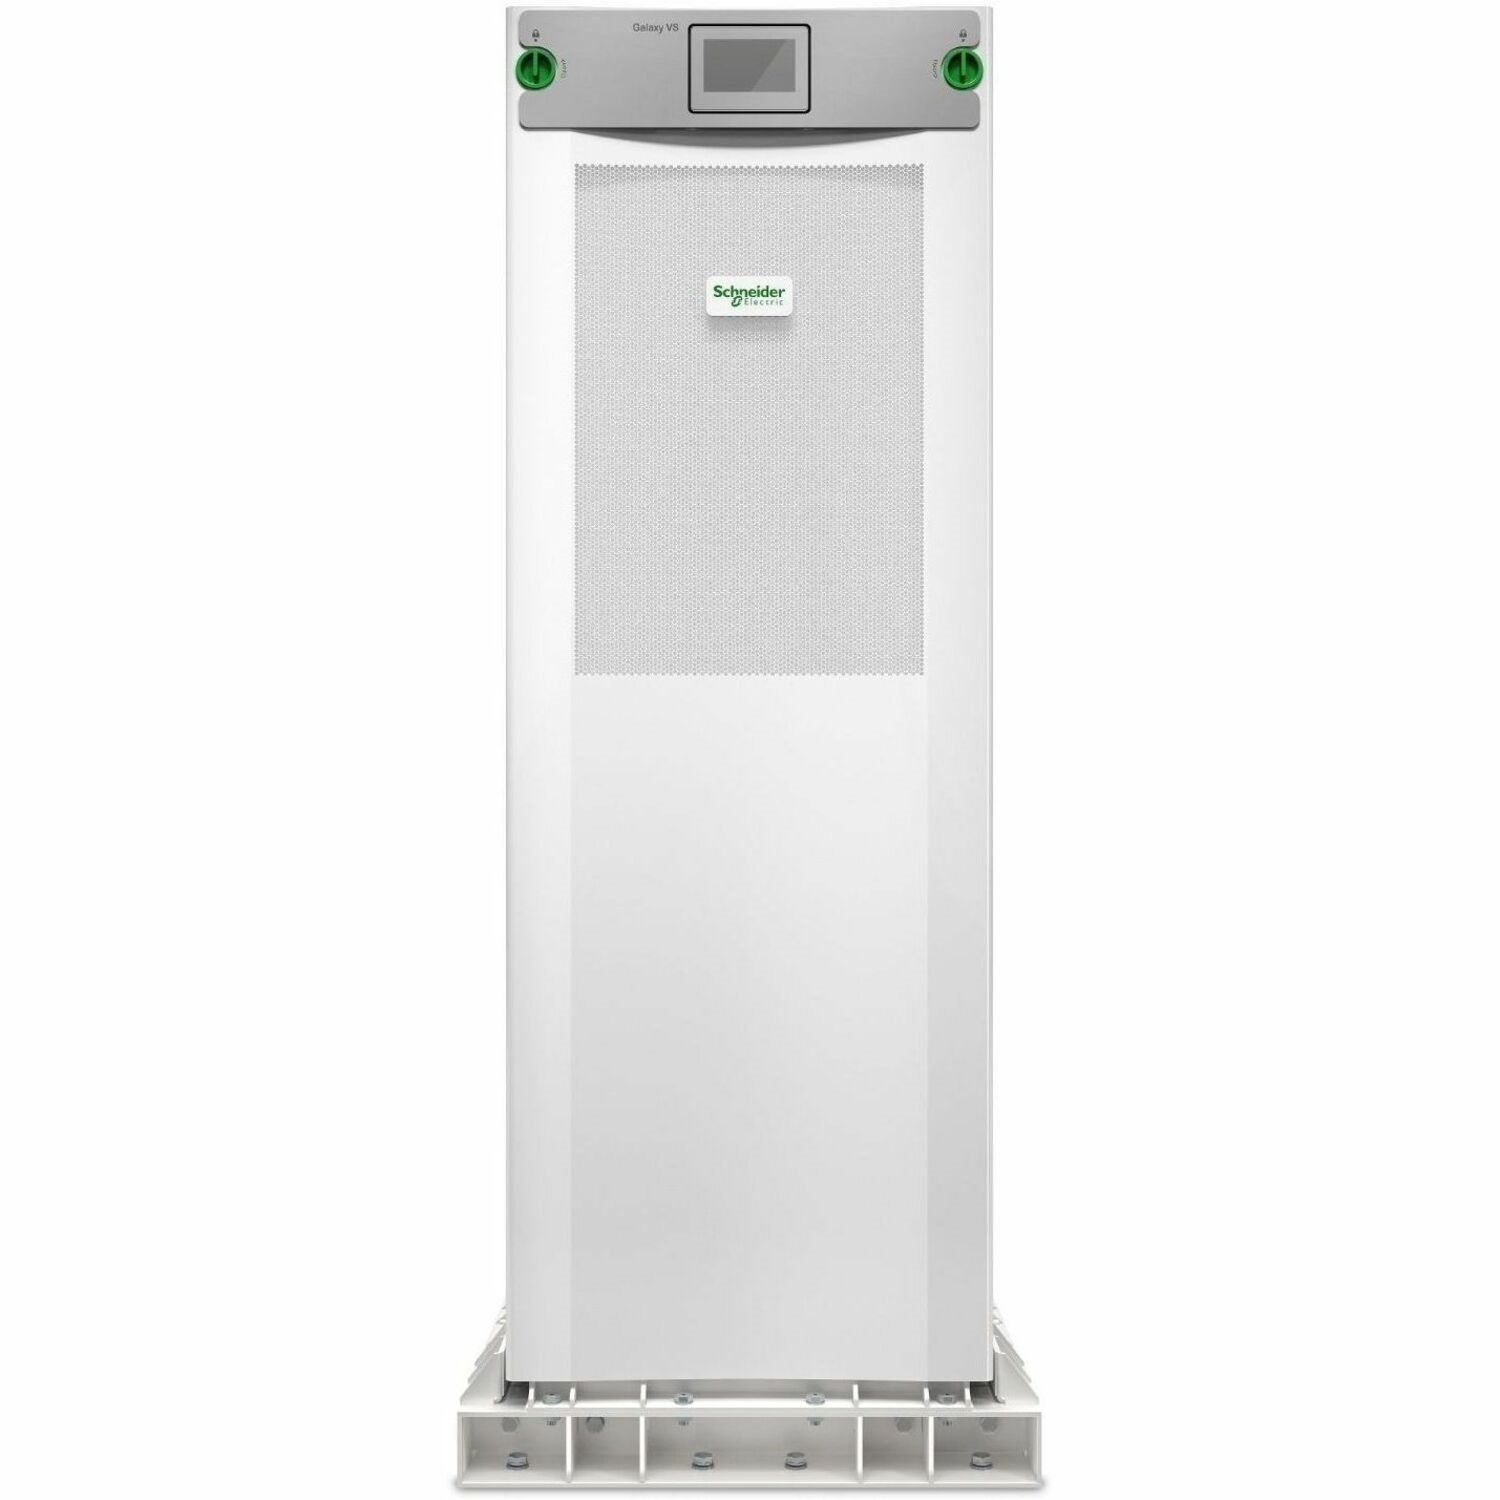 APC by Schneider Electric Galaxy VS Double Conversion Online UPS - 40 kVA/40 kW - Three Phase